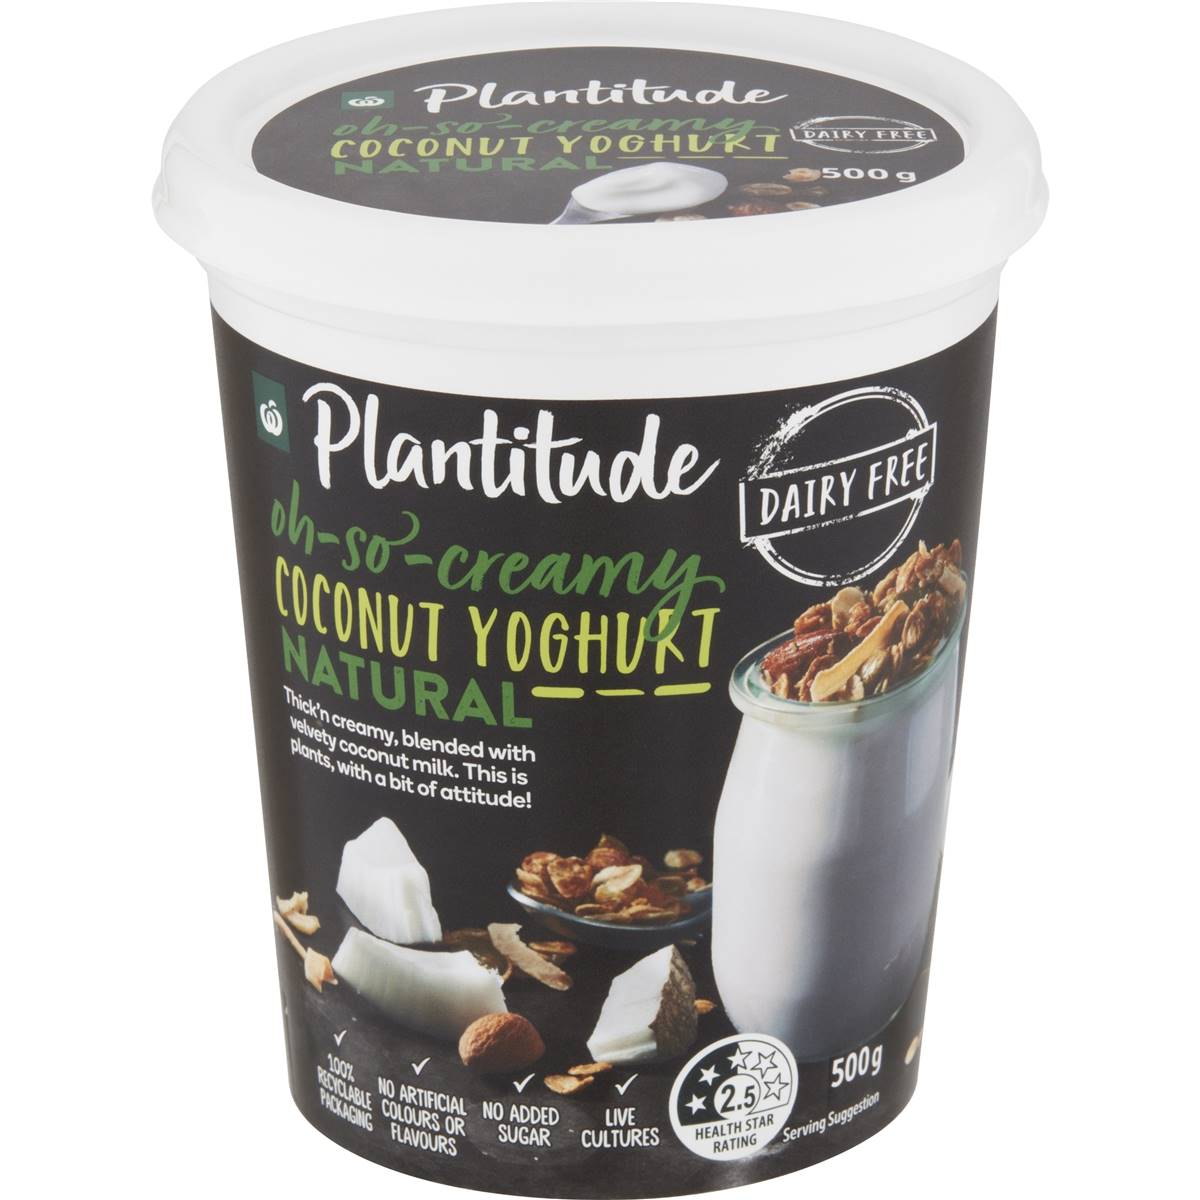 Calories in Woolworths Plantitude Dairy Free Coconut Yoghurt Natural